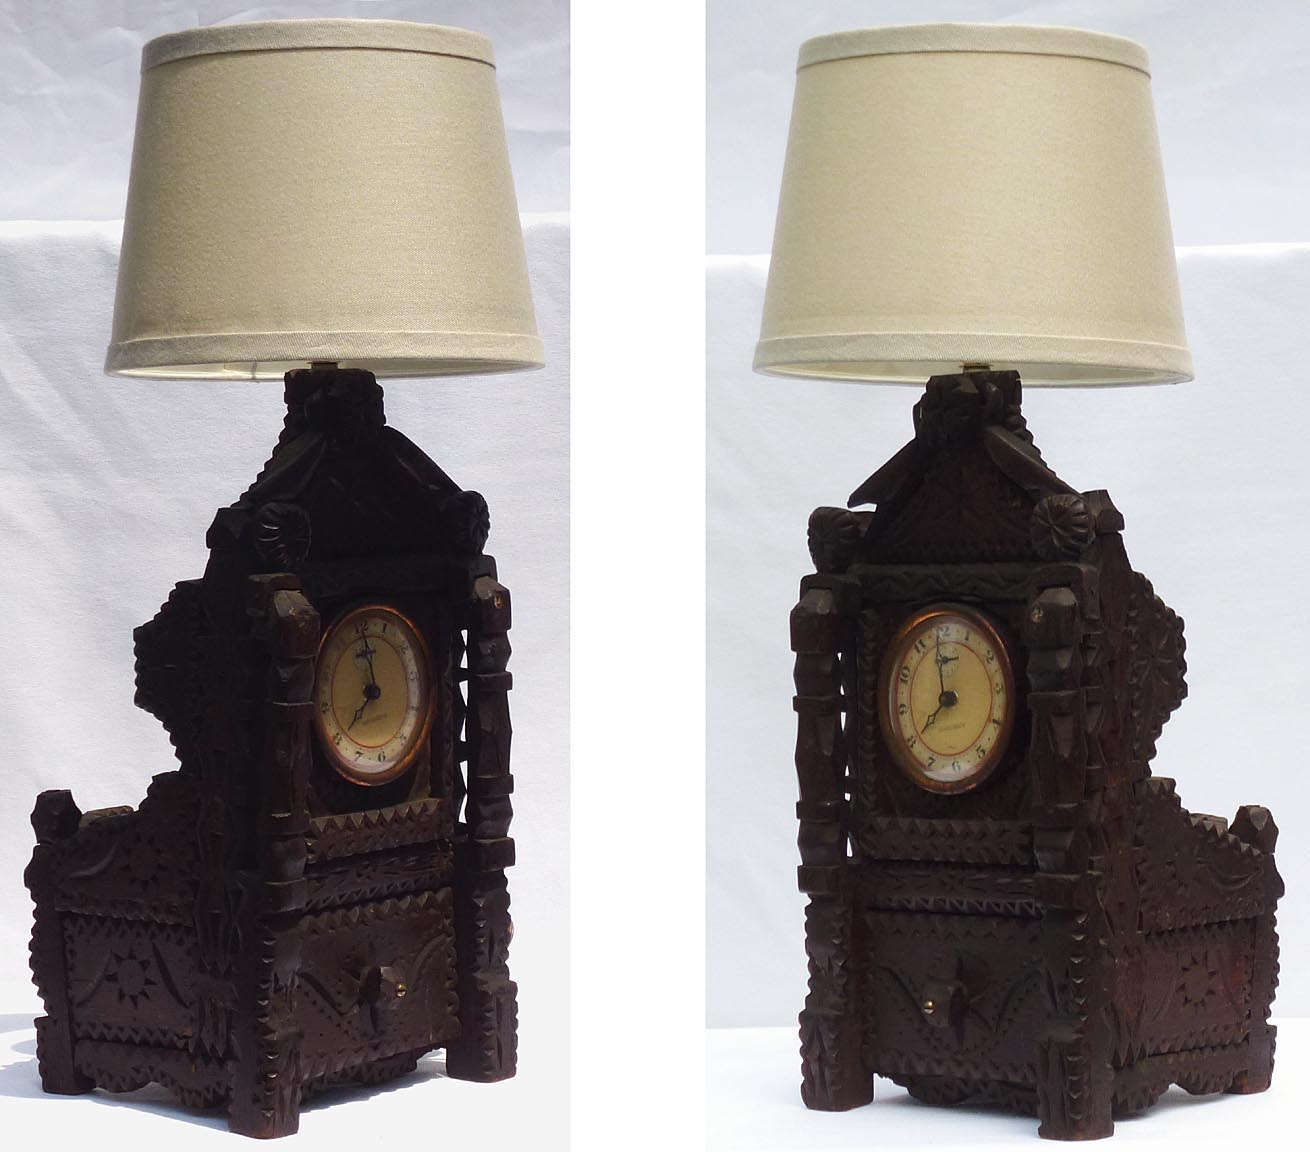 Tramp art lamp with clock and drawer